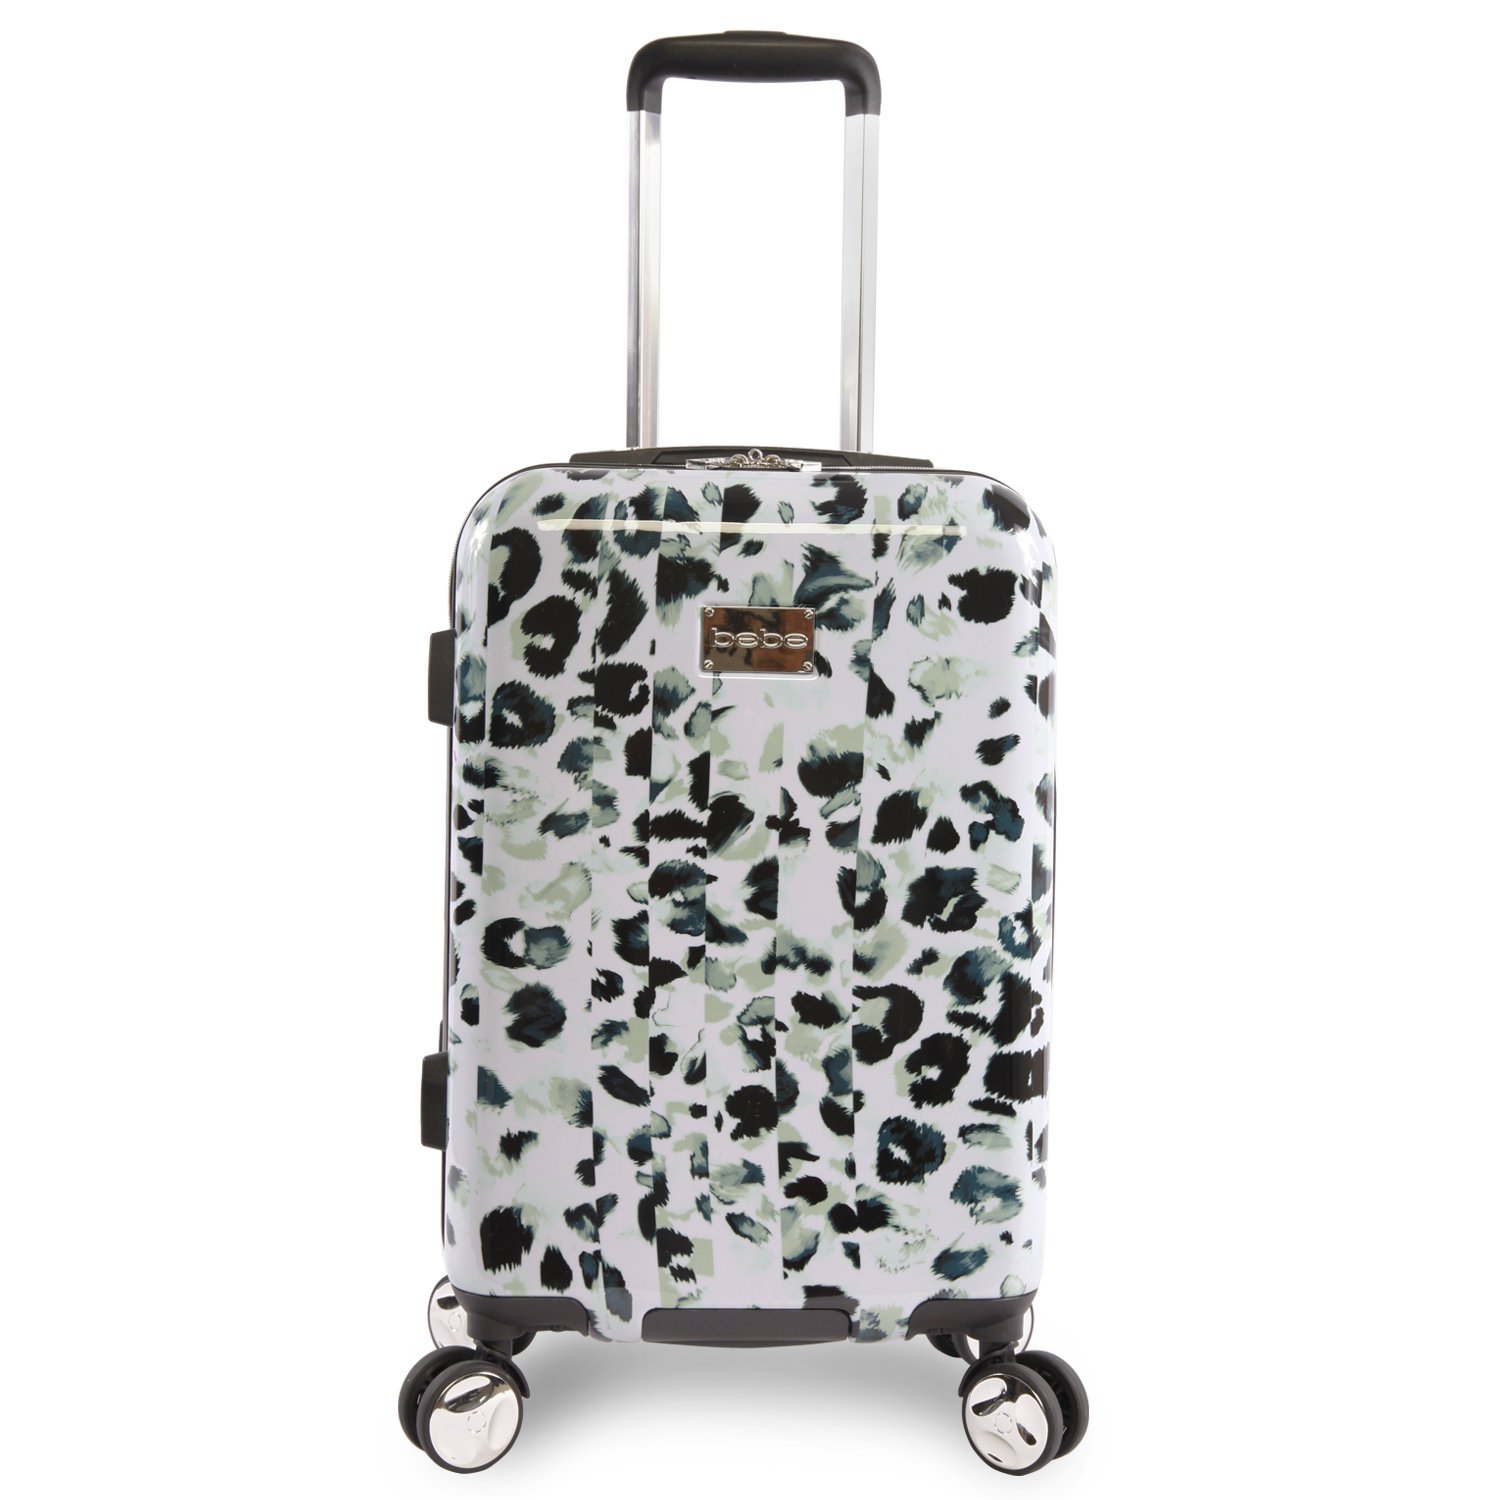 Bebe Women's Dotted 21-Inch Carry-On Bag, Size 21 Inch in Winter Leopard